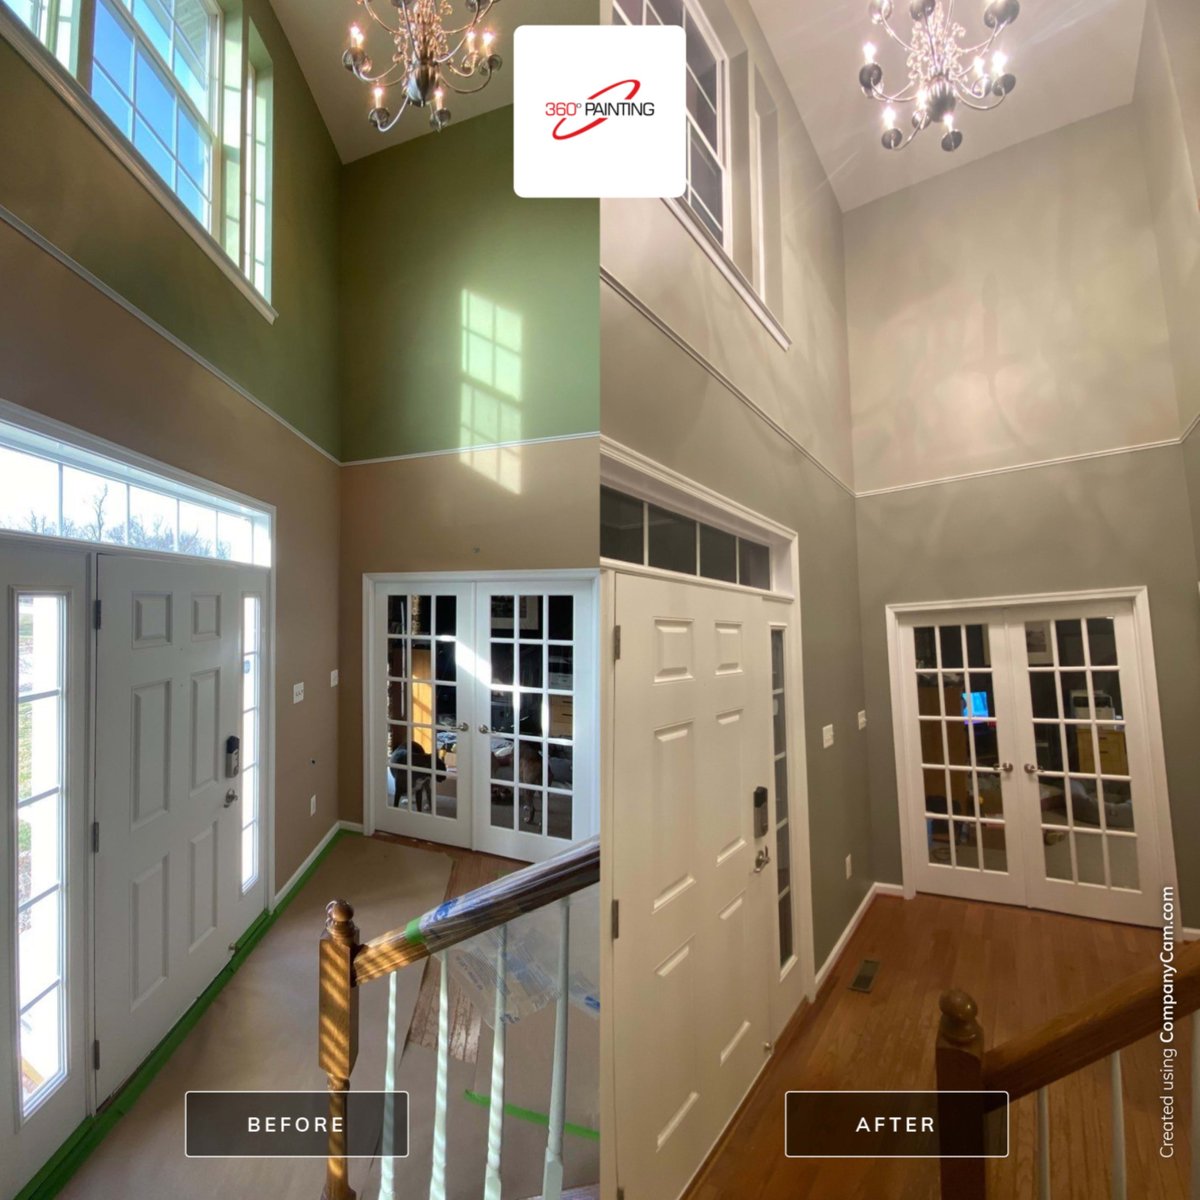 Transform your foyer into a stunning first impression with tasteful shades that speak style and comfort 🎨✨. Let 360 Painting help you choose the perfect palette! 🏡 #HomeStyle #PaintingExperts #FoyerMakeover #360Painting #360PaintingYorkCounty #PaintingPerfection